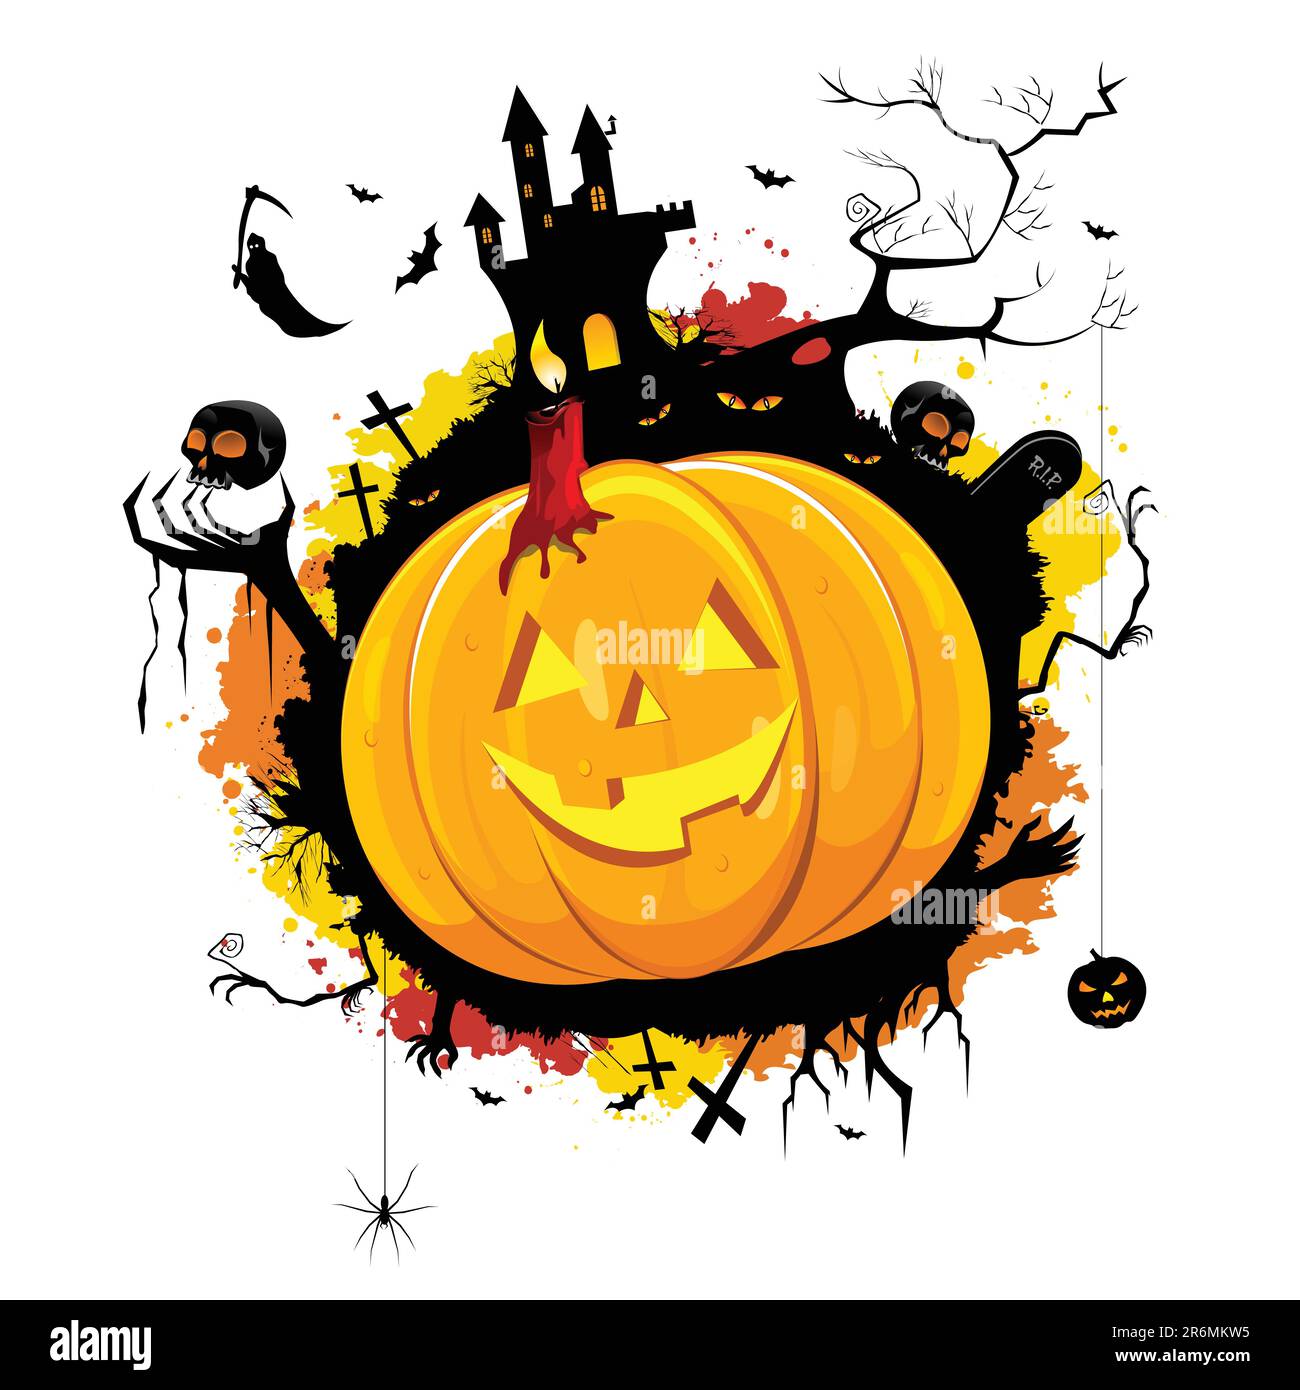 illustration of halloween pumpkin with different elements related to halloween Stock Vector